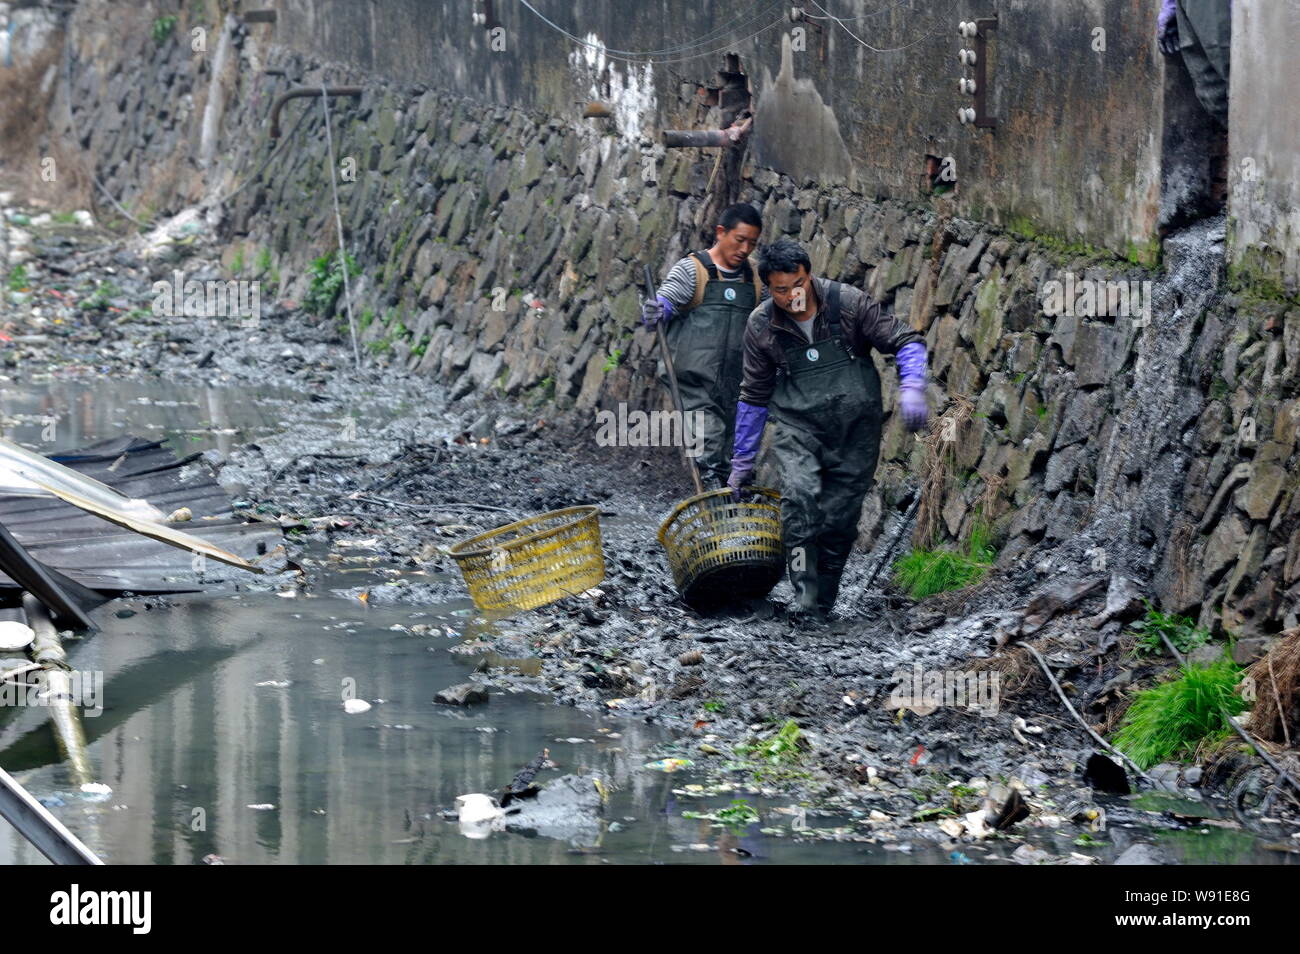 --FILE--Sanitation workers clean up a polluted river in Ruian city, southeast Chinas Zhejiang province, 18 February 2013.   Web journalist/activist De Stock Photo